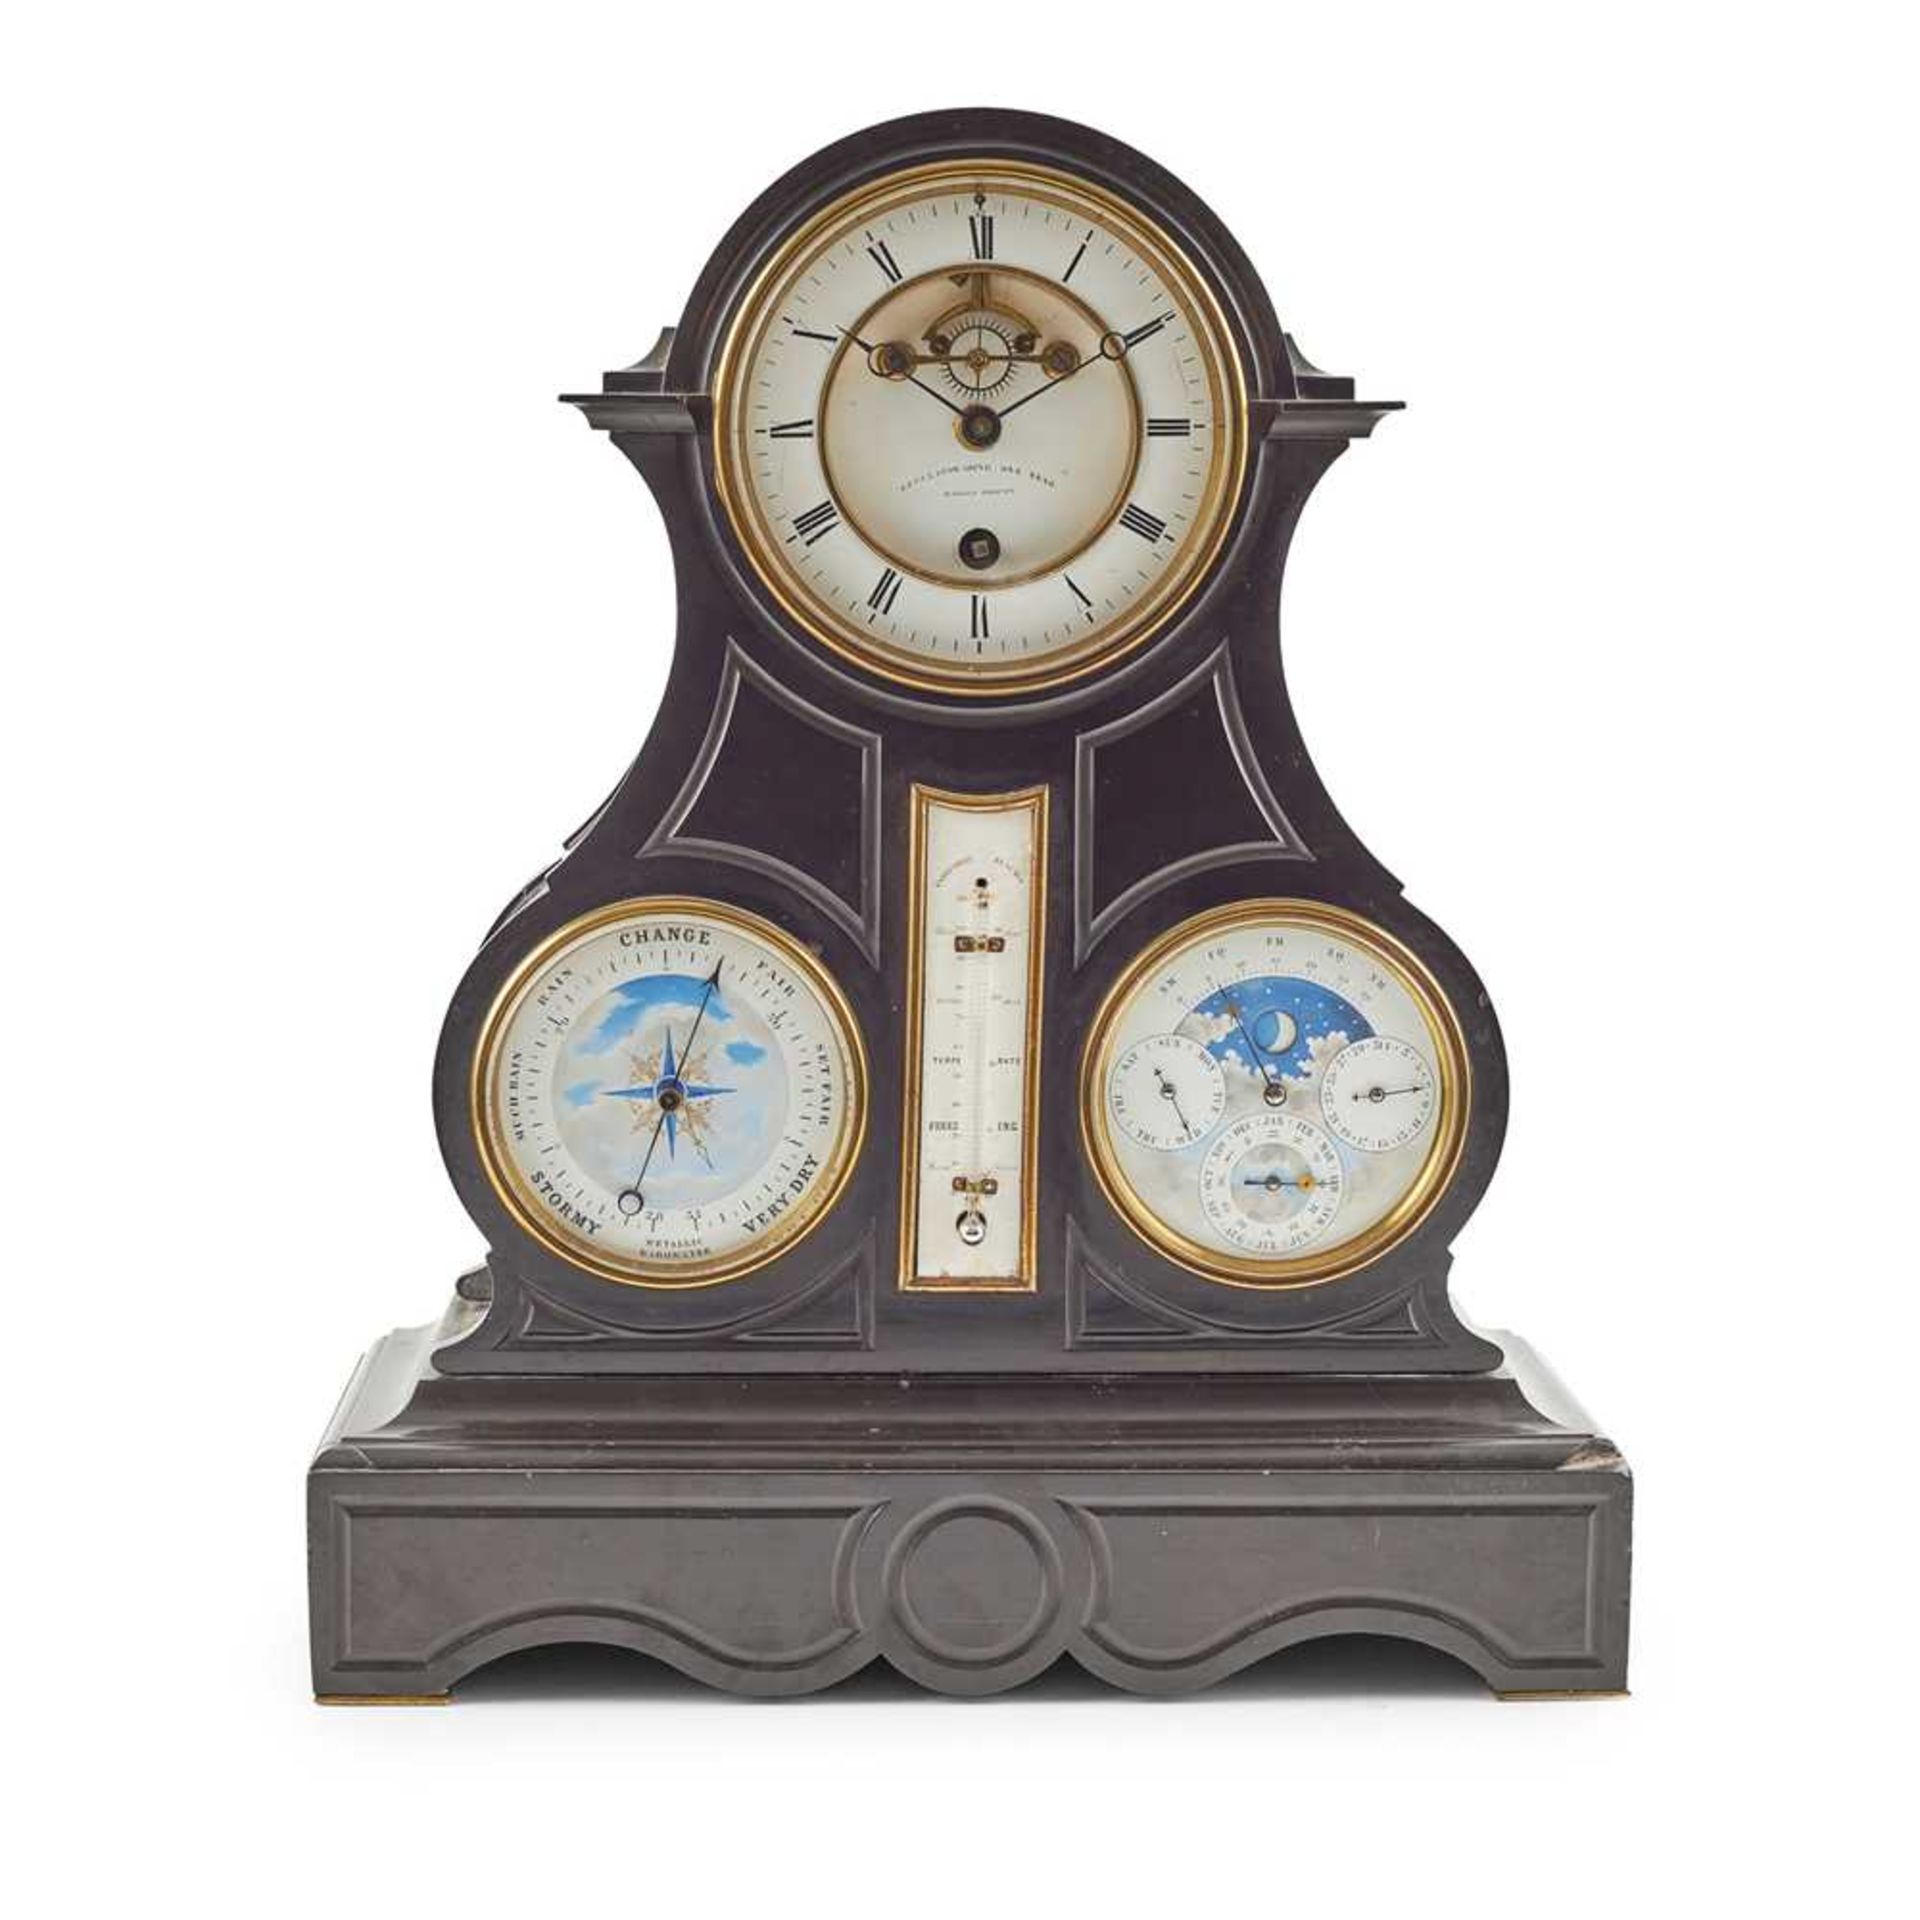 FRENCH SLATE PERPETUAL CALENDAR MANTEL CLOCK WITH BAROMETER, ACHILLE BROCOT, PARIS 19TH CENTURY